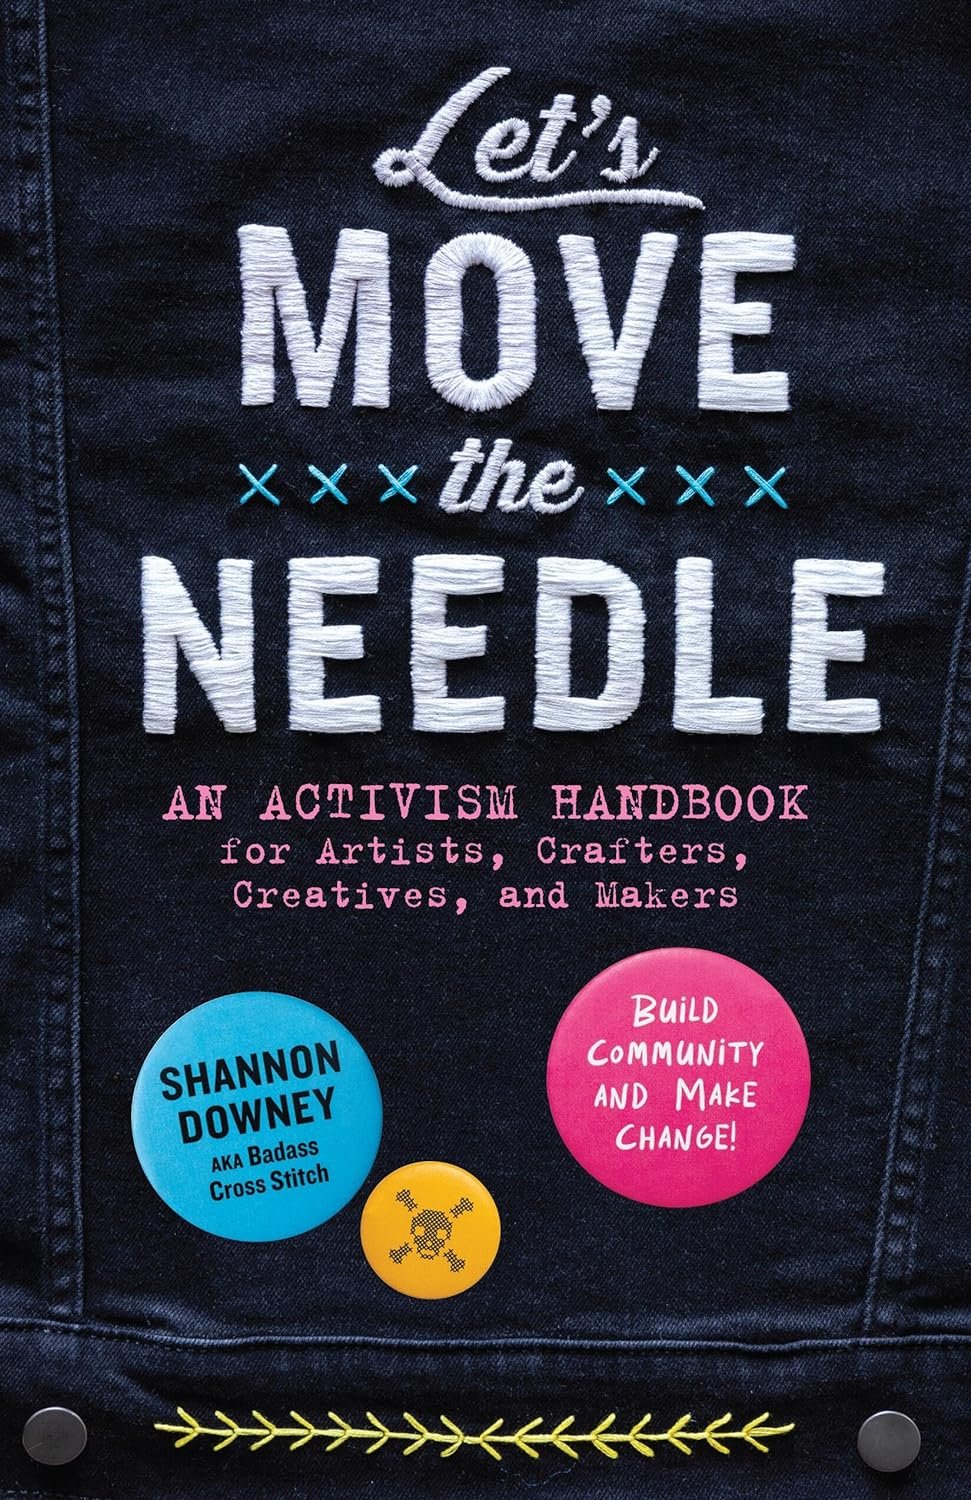 An inspiring and richly-illustrated guide to creating change in the world using art as a vehicle for creative resistance by the artist and craftivist behind Badass Cross Stitch.